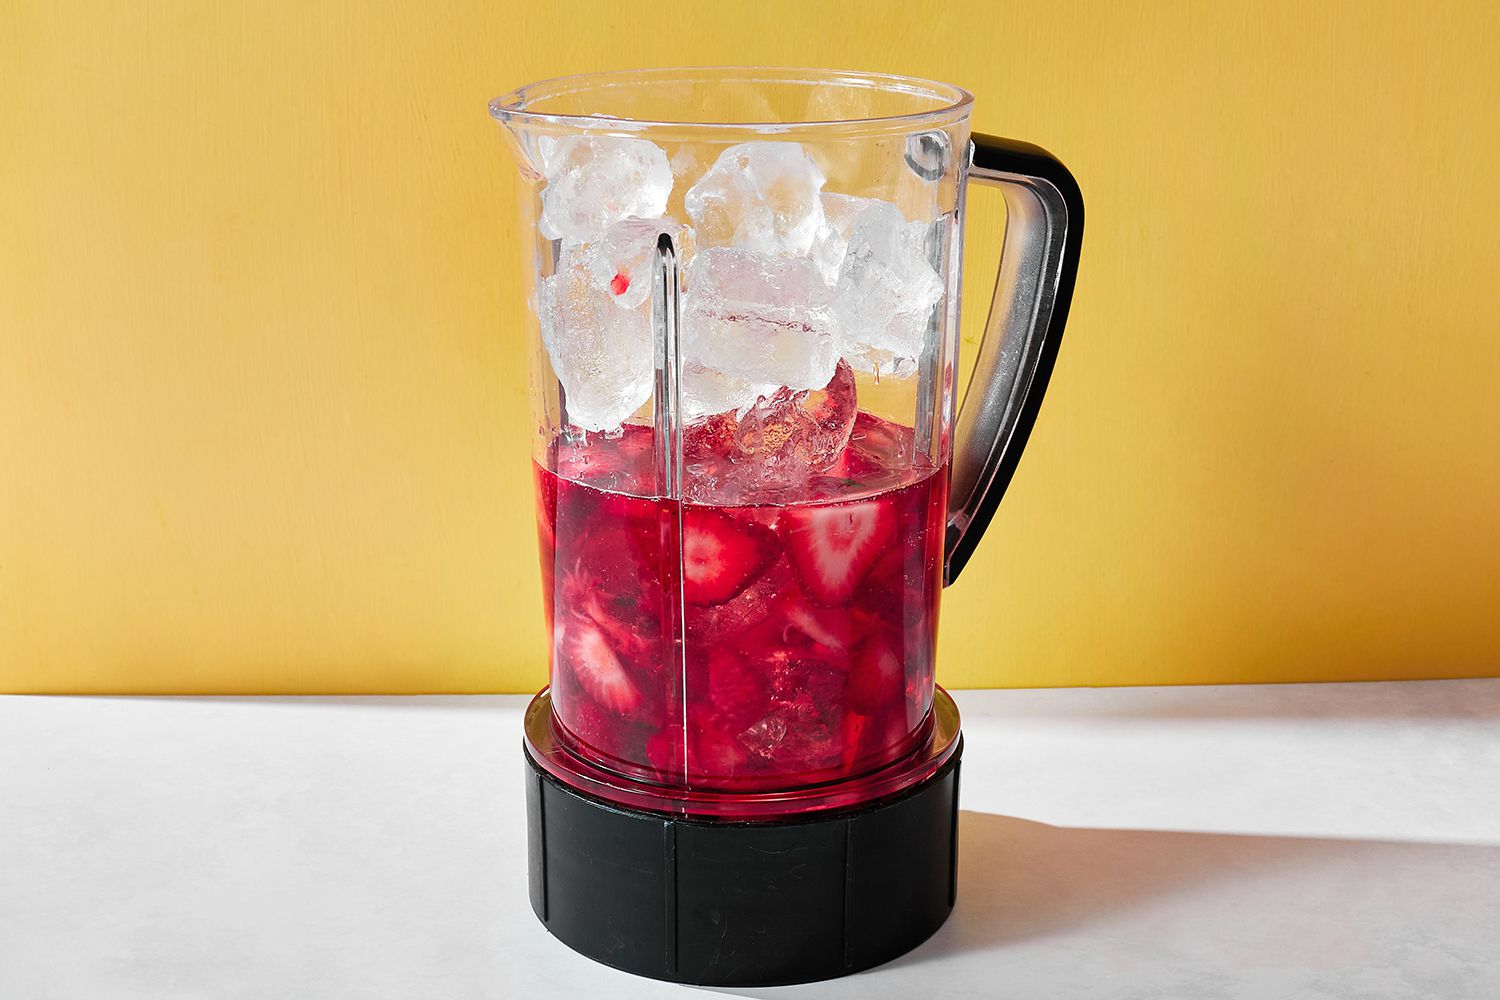 A blender filled with wine, strawberries, ice cubes, sugar, and lemon juice